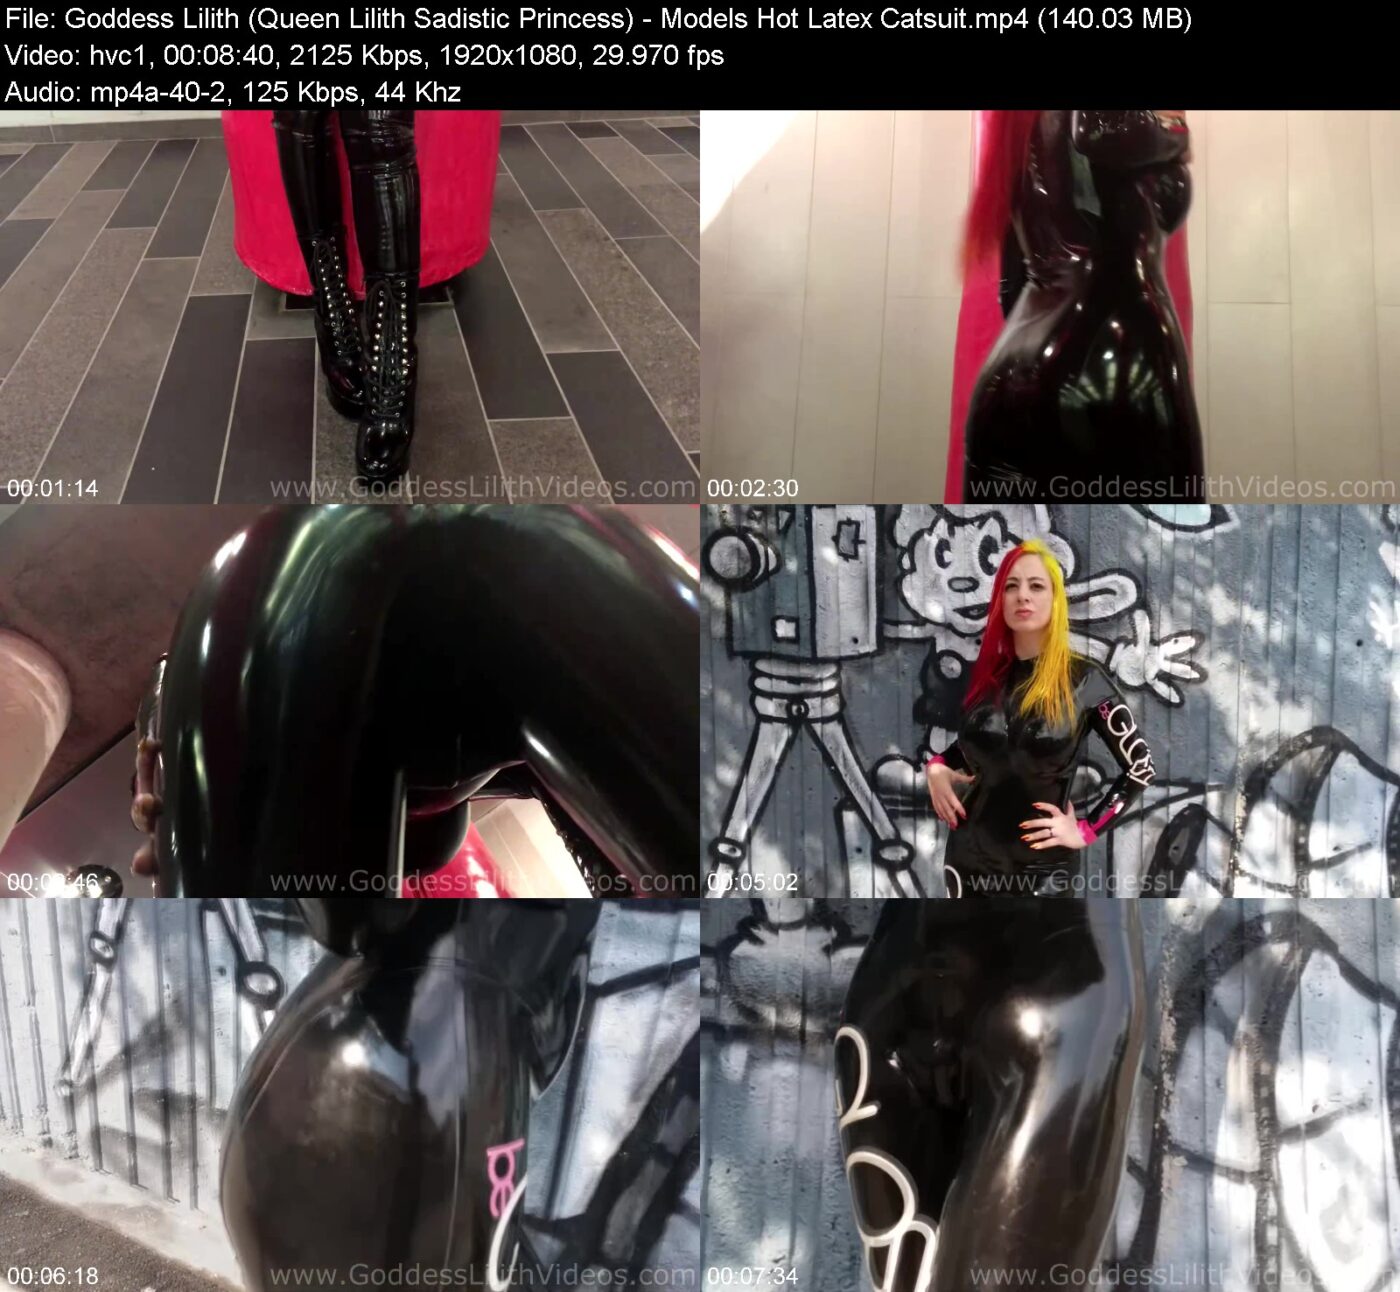 Goddess Lilith (Queen Lilith Sadistic Princess) in Models Hot Latex Catsuit